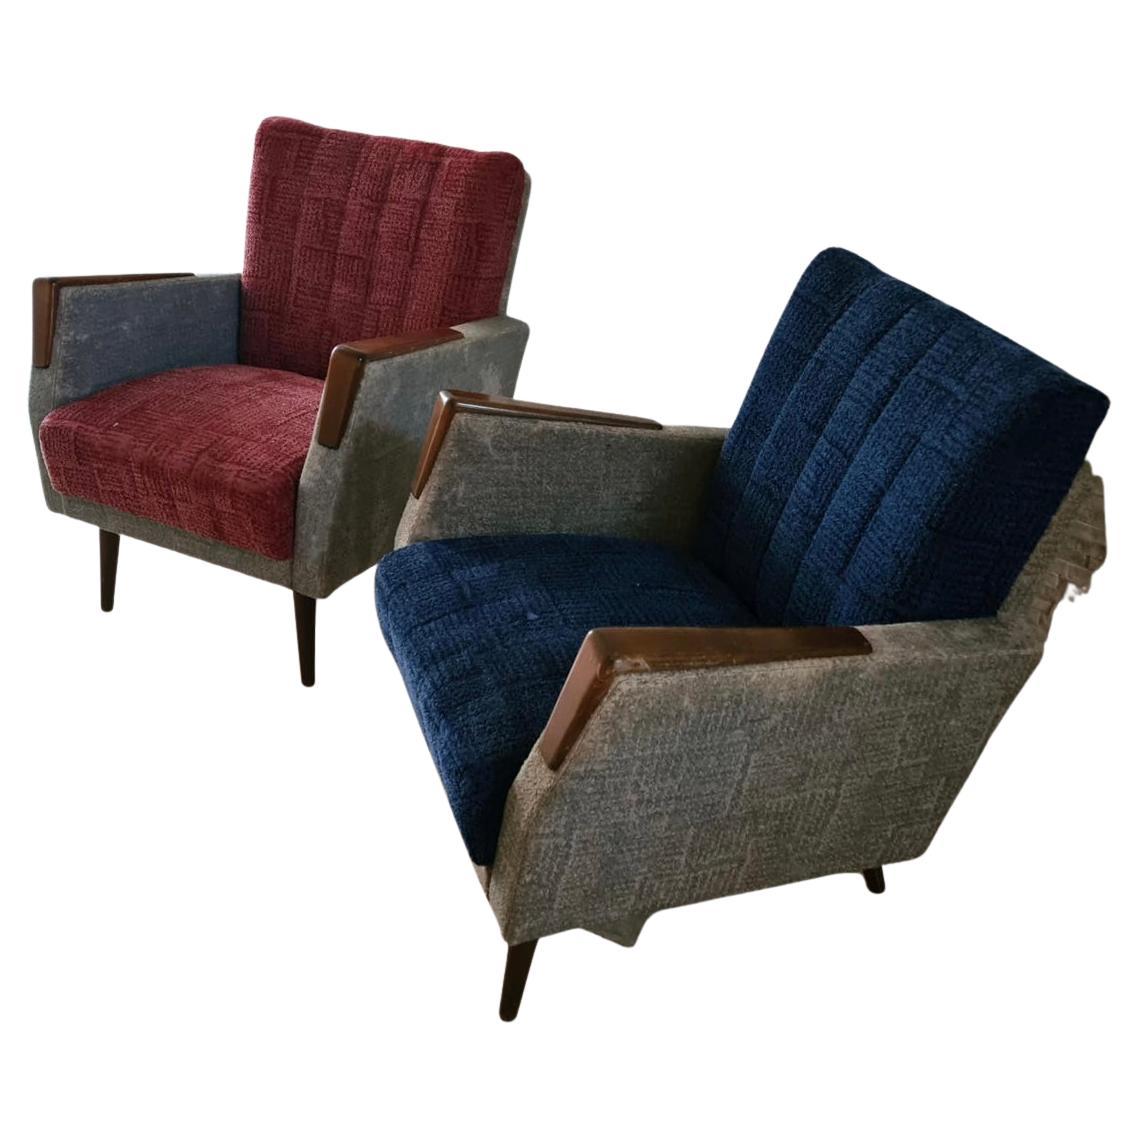 Gio Ponti “Stile” Armchairs couples Wood stuffing Cloth, 1950, Italy For Sale